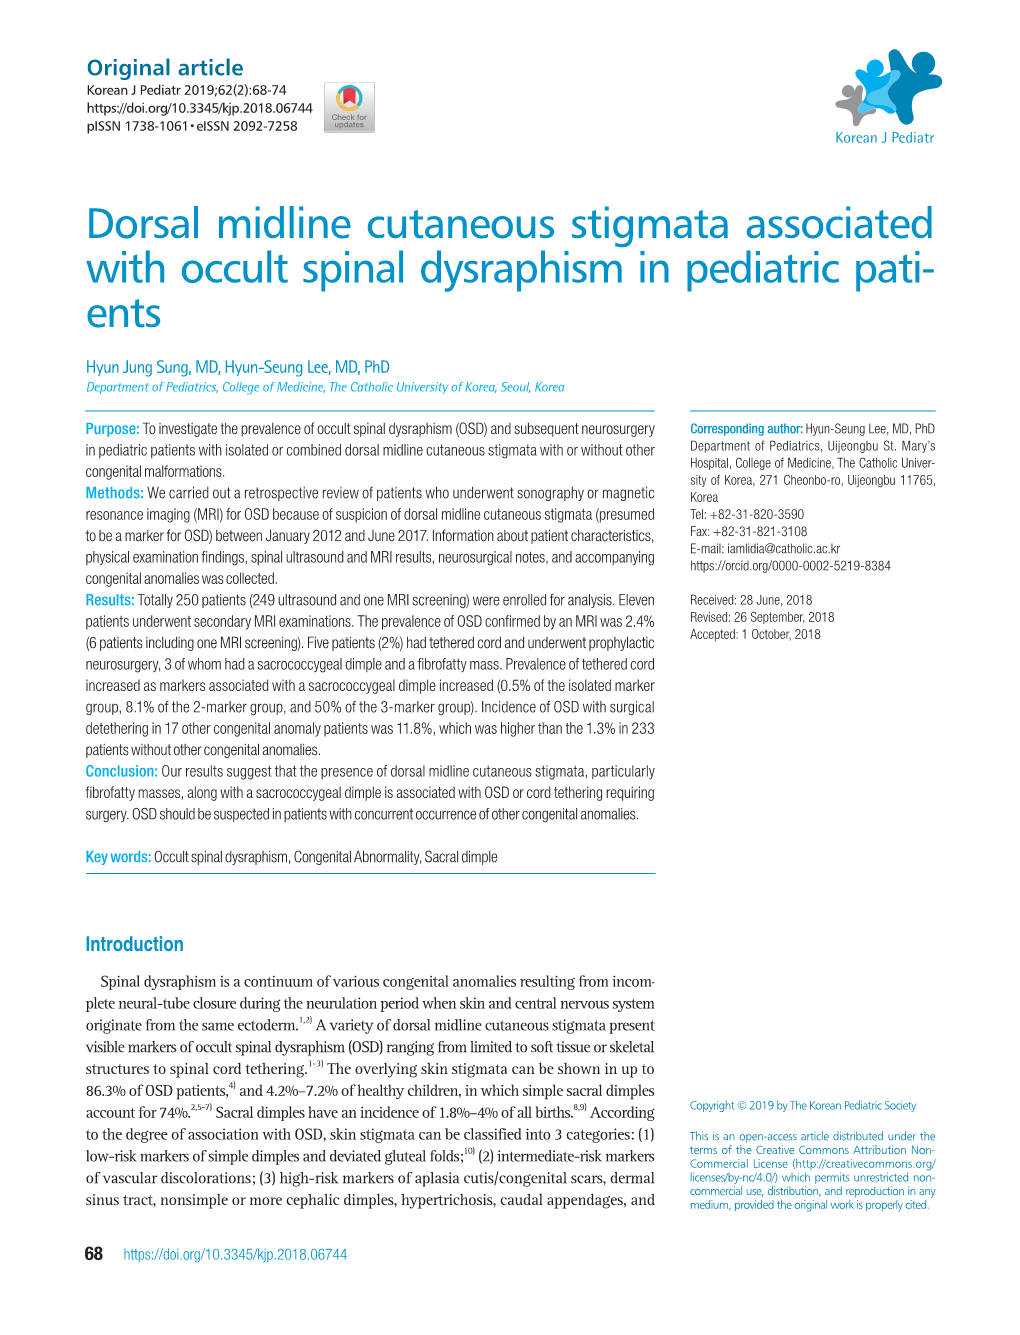 Dorsal Midline Cutaneous Stigmata Associated with Occult Spinal Dysraphism in Pediatric Pati­ Ents